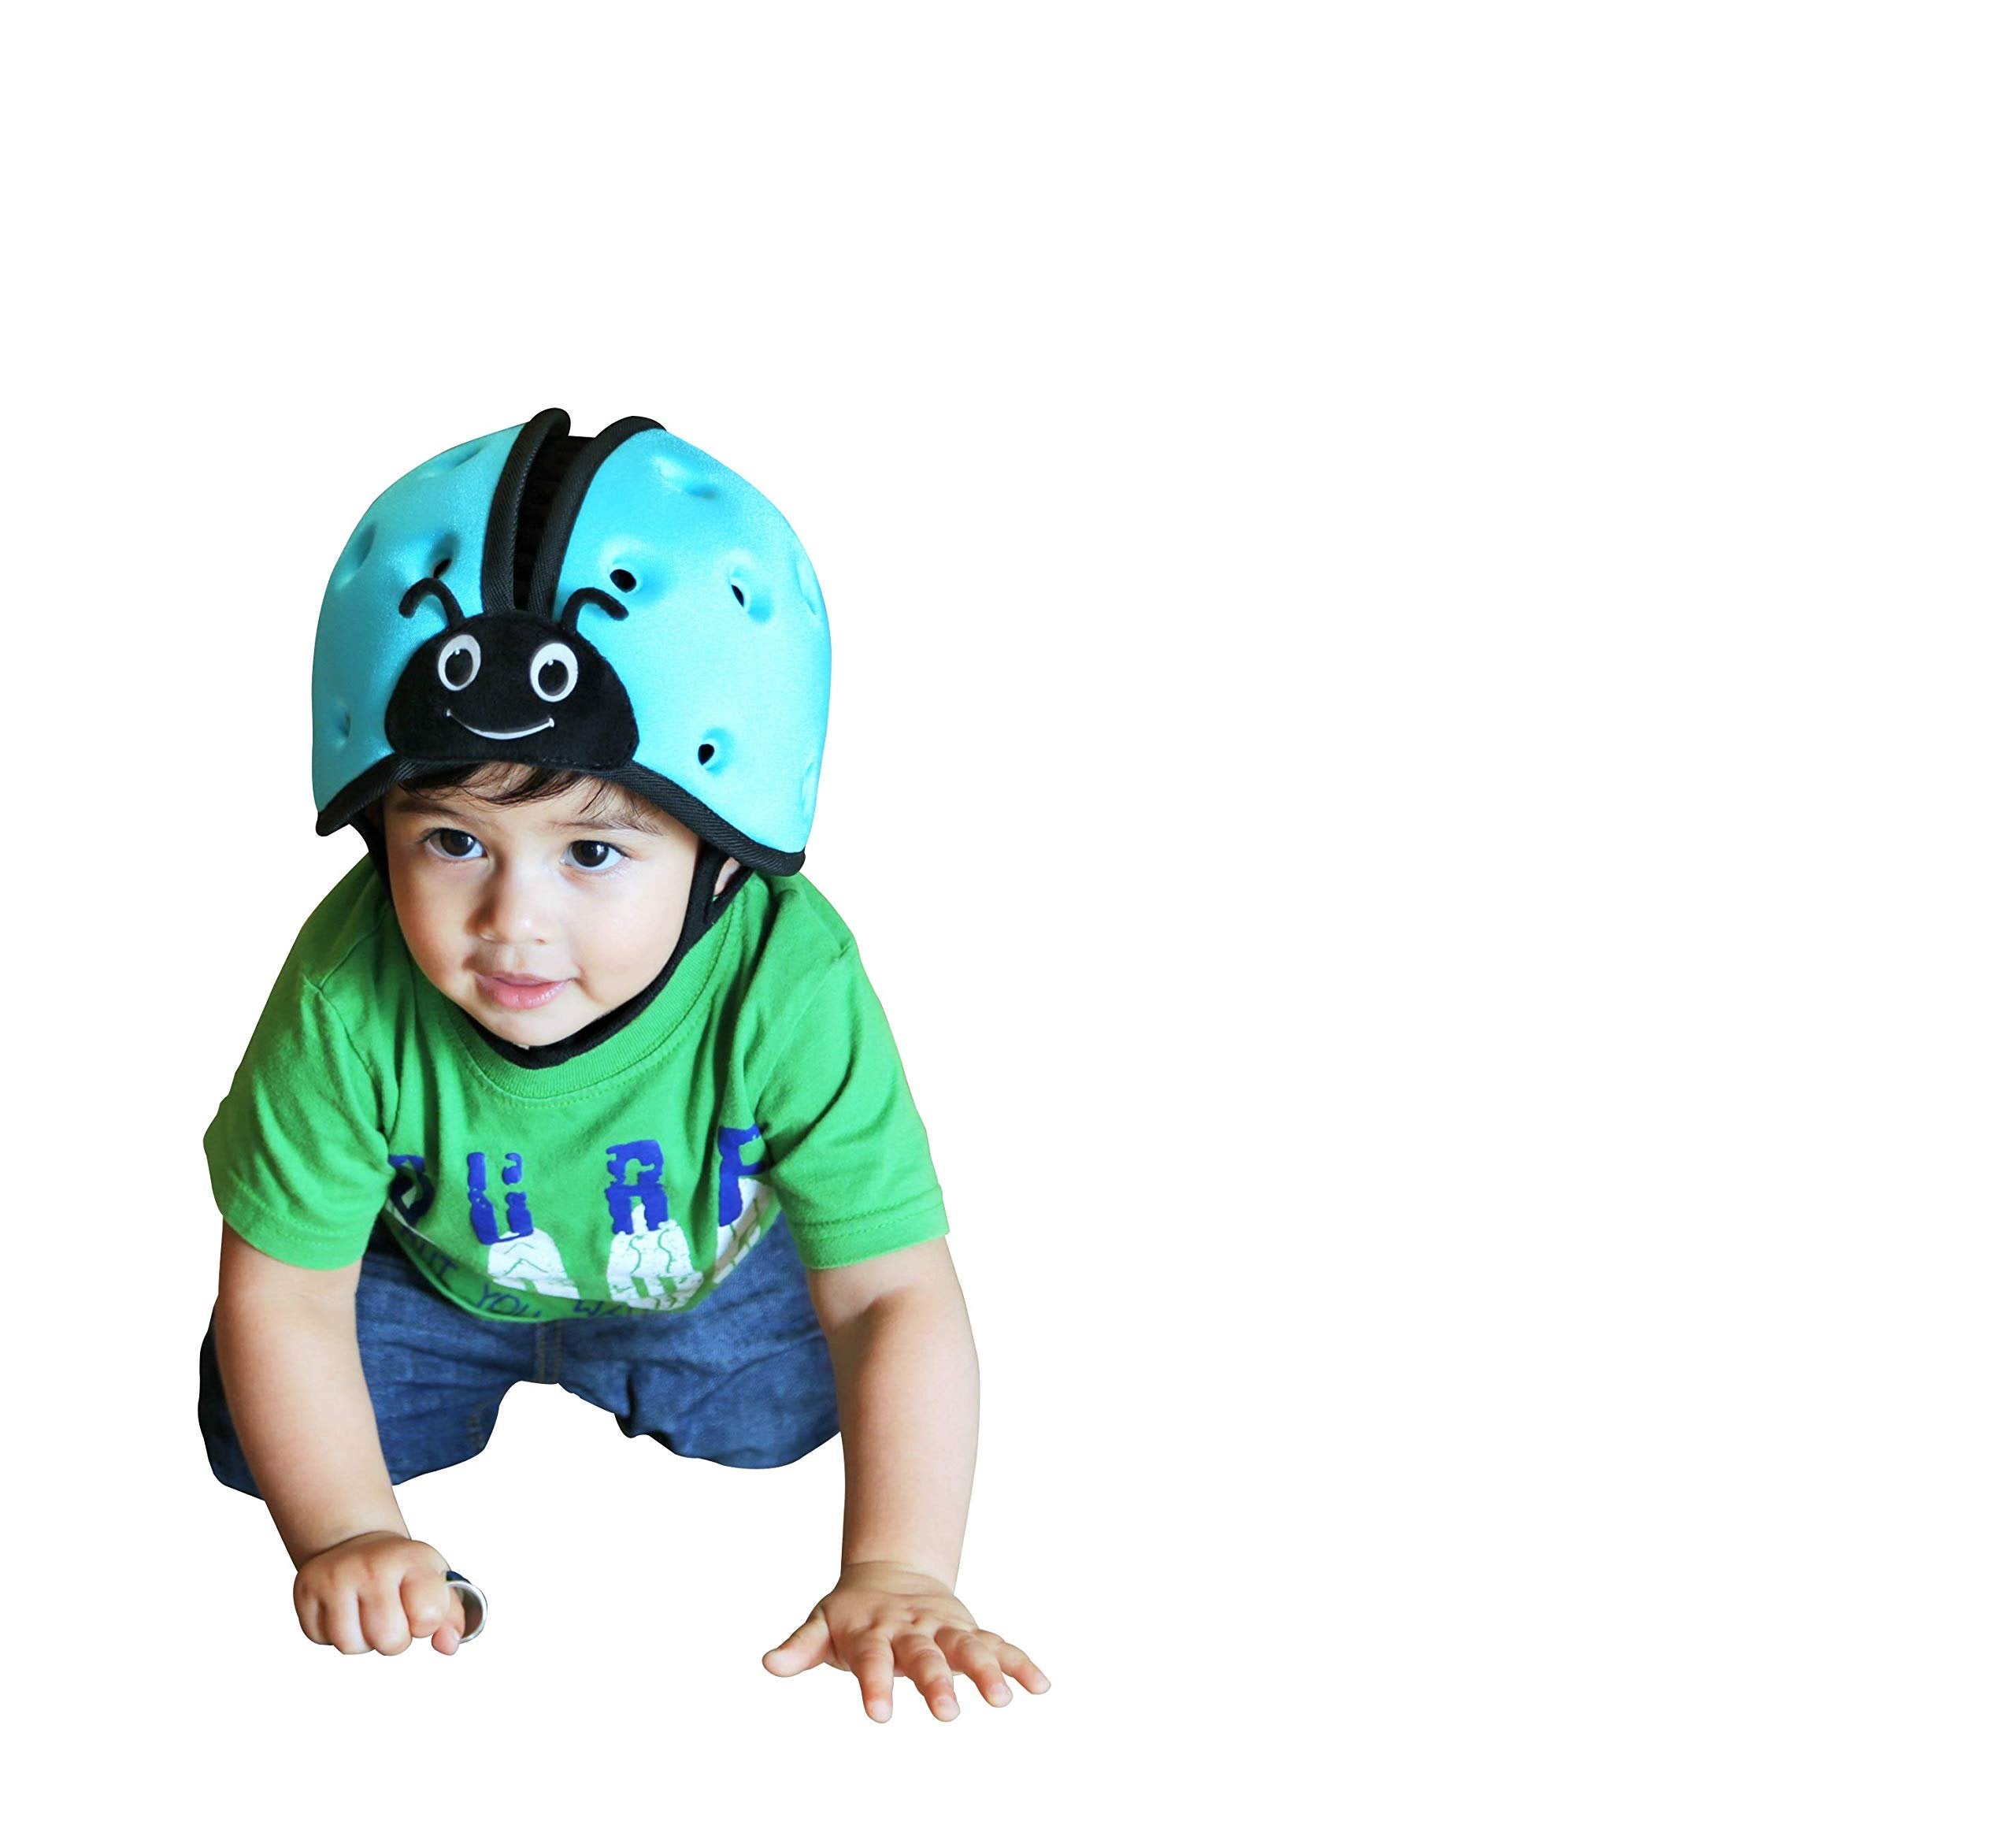 SafeheadBABY: Award-Winning Infant Safety Helmet, Baby Crawling and Walking Helmet, Toddler Head Protection, Expandable and Adjustable, Ultra-Lightweight, Tested and Certified